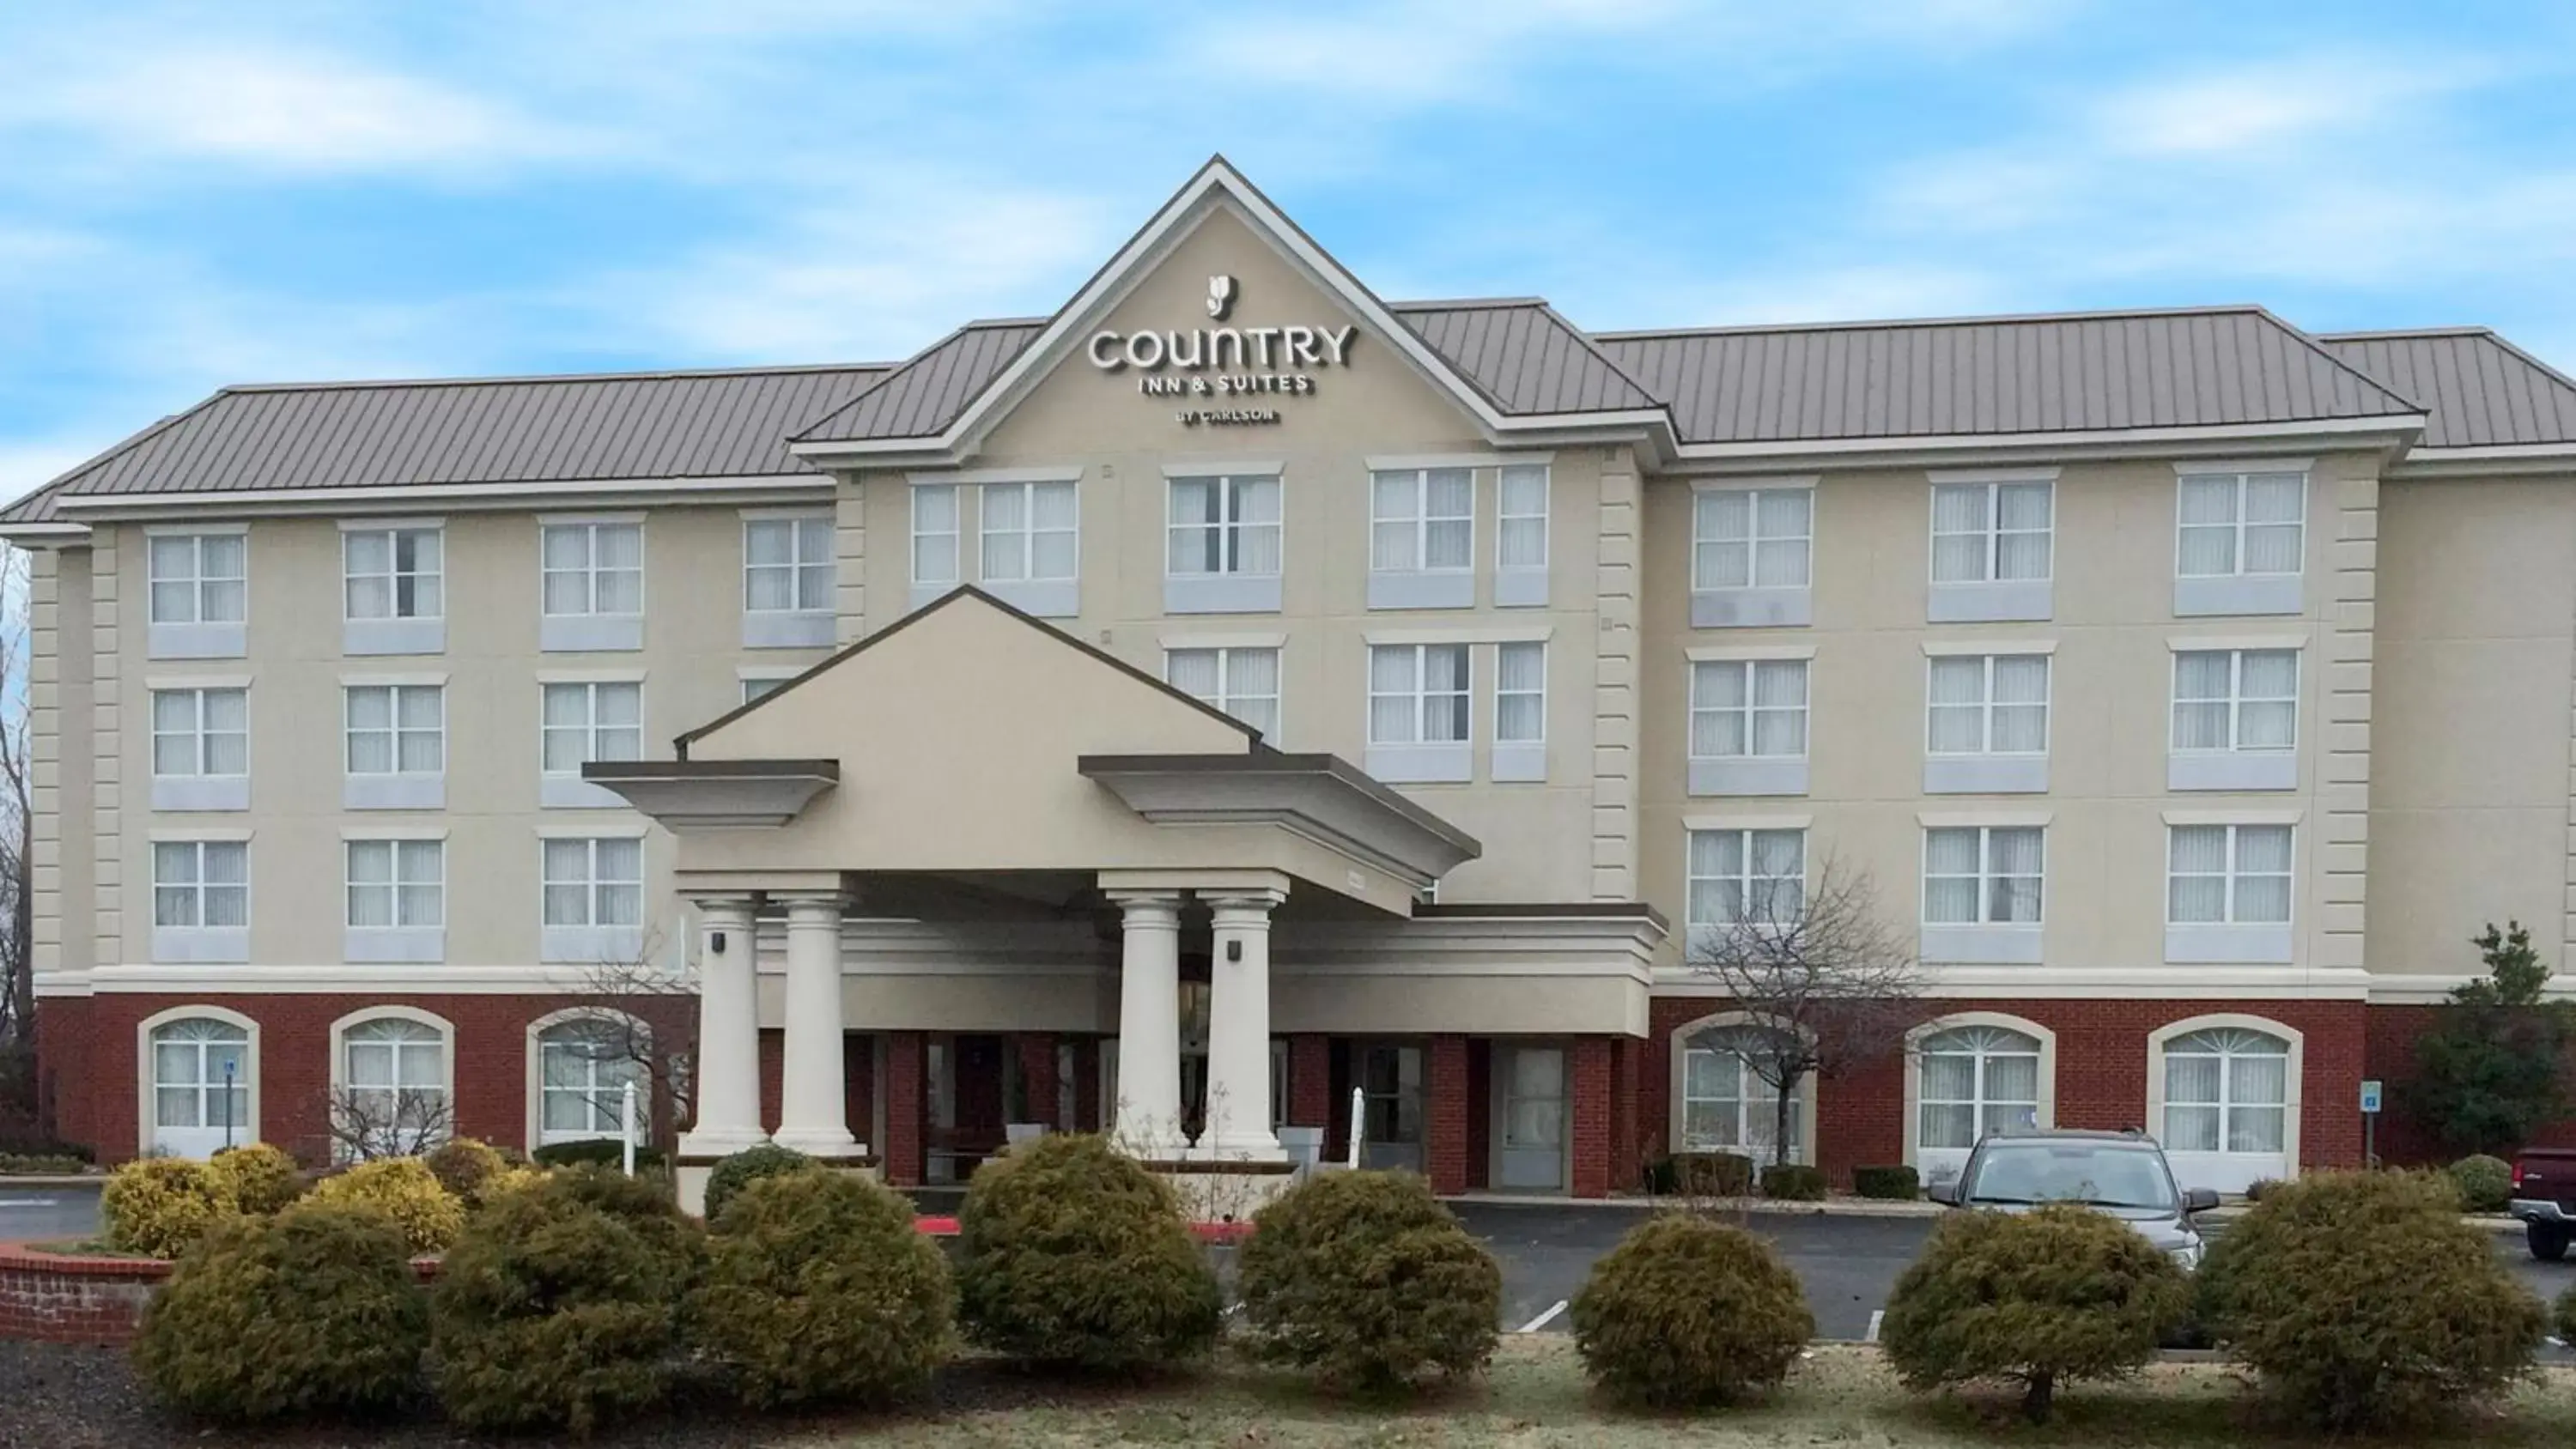 Facade/entrance, Property Building in Country Inn & Suites by Radisson, Evansville, IN